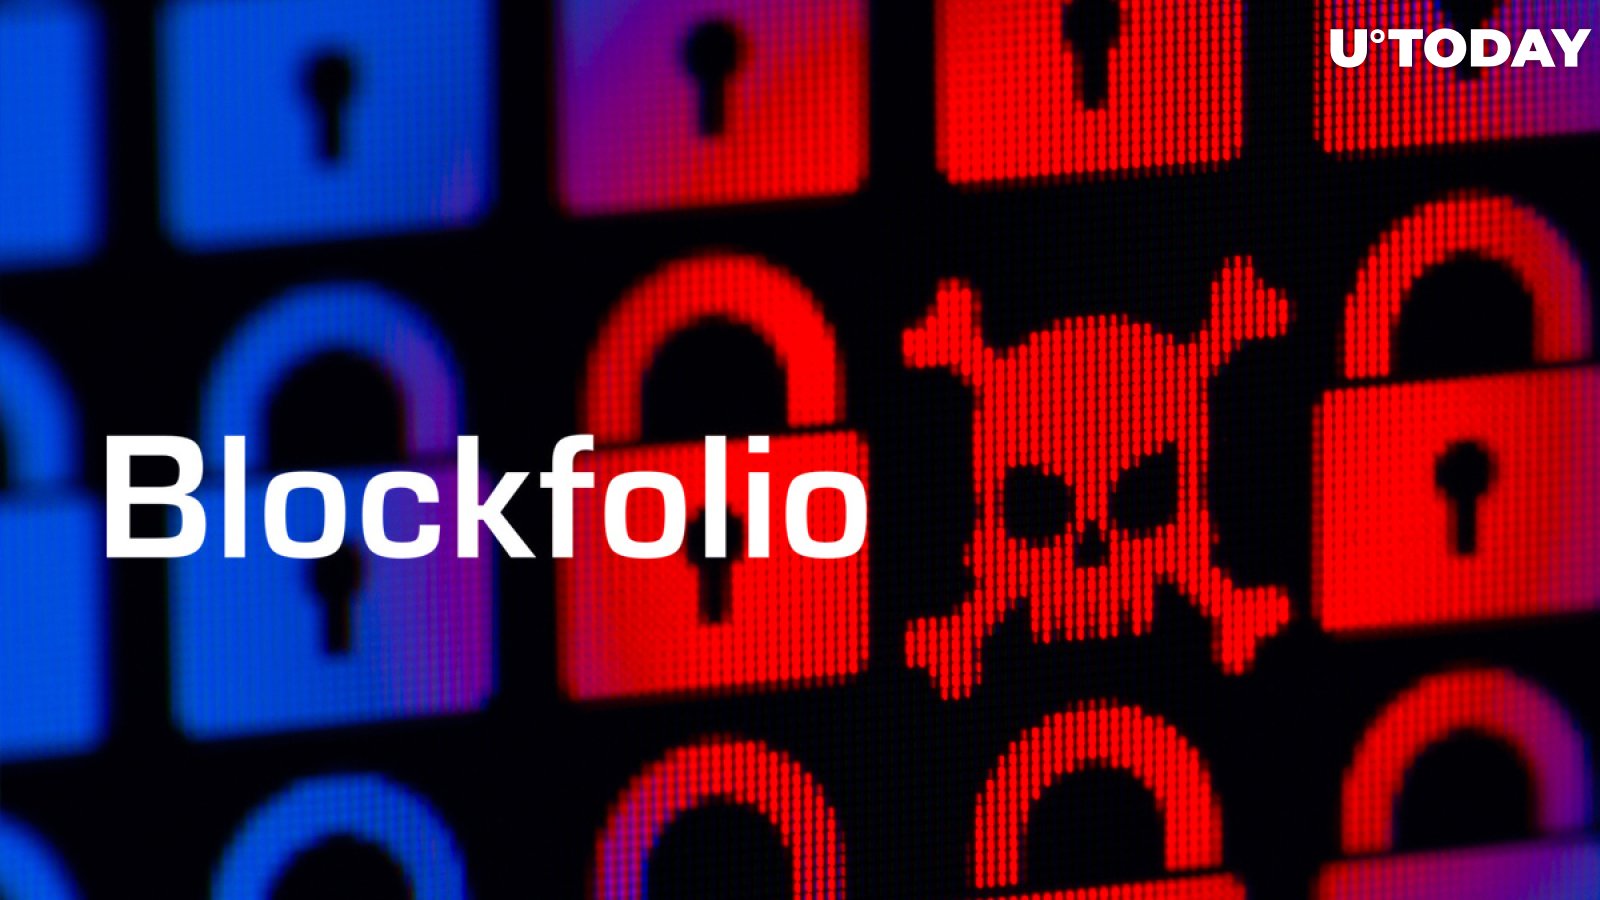 Blockfolio Users Receive Offensive Messages, Suspect Crypto App Is Hacked